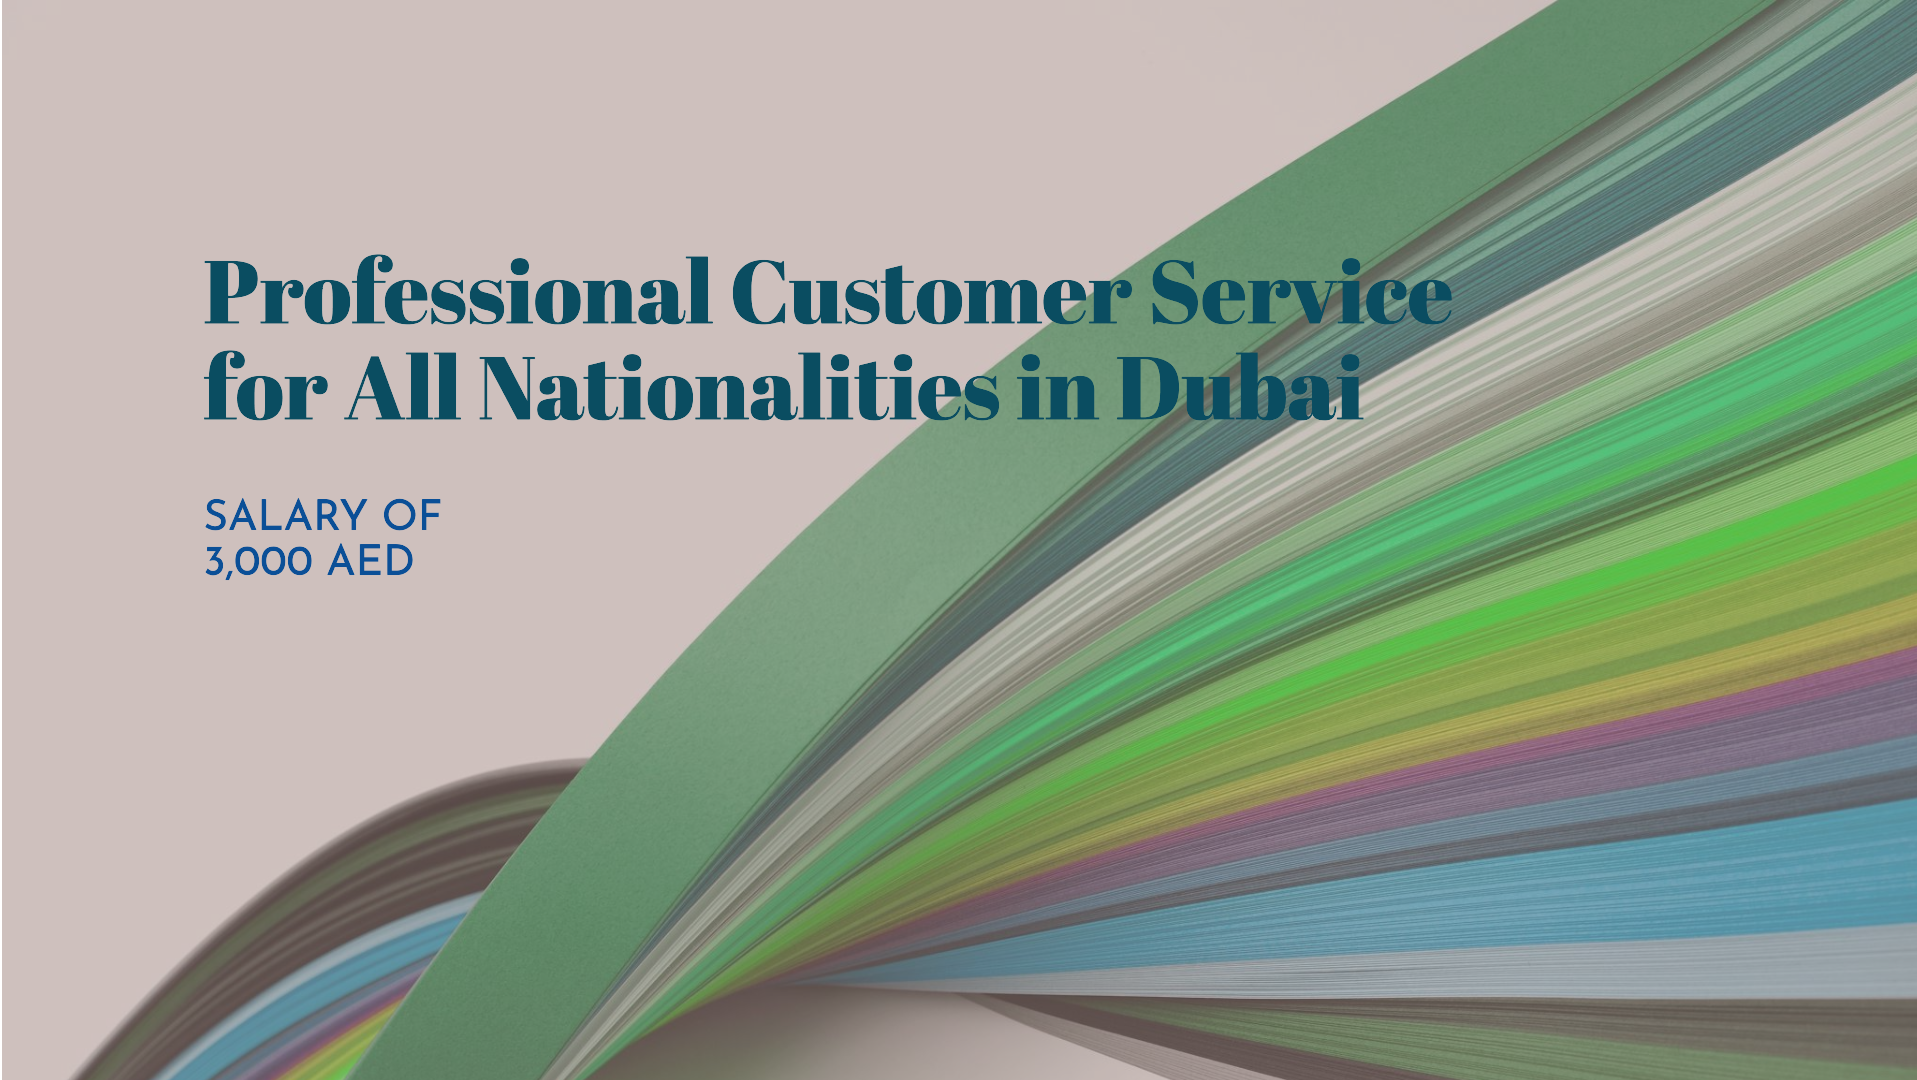 customer service companies in dubai for all nationalities with salary 3,000 AED